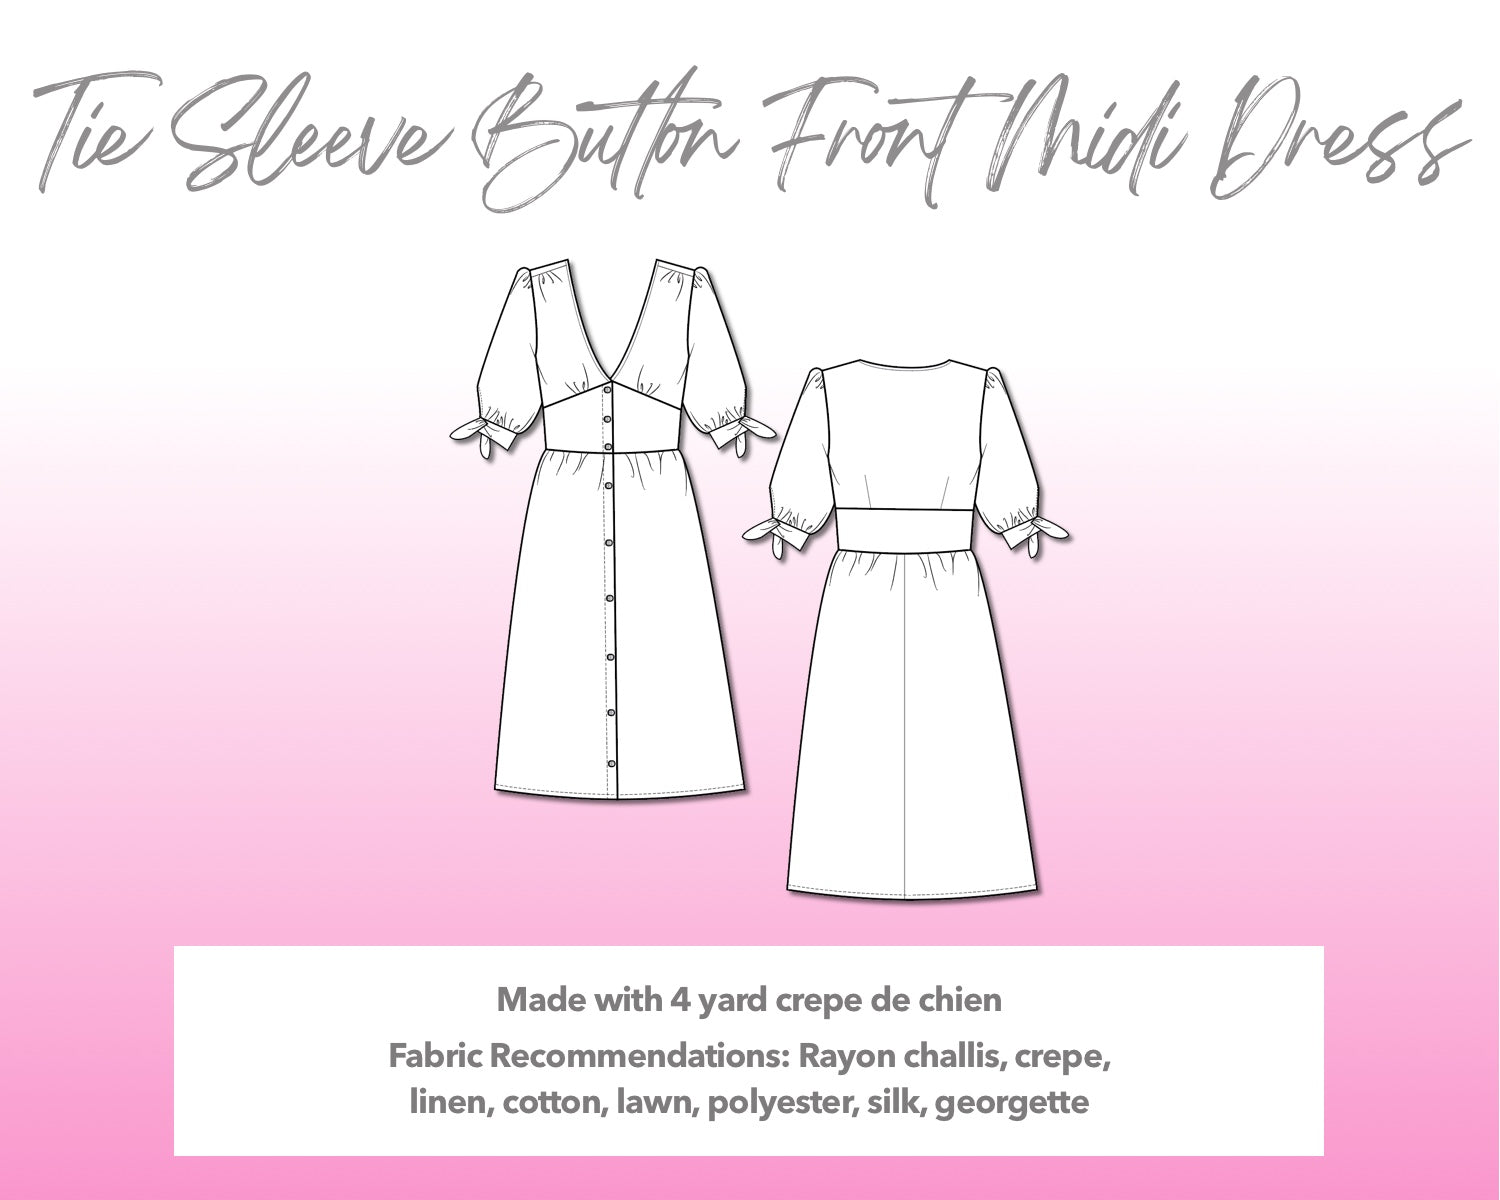 Illustration and detailed description for Tie Sleeve Button Front Midi Dress sewing pattern.